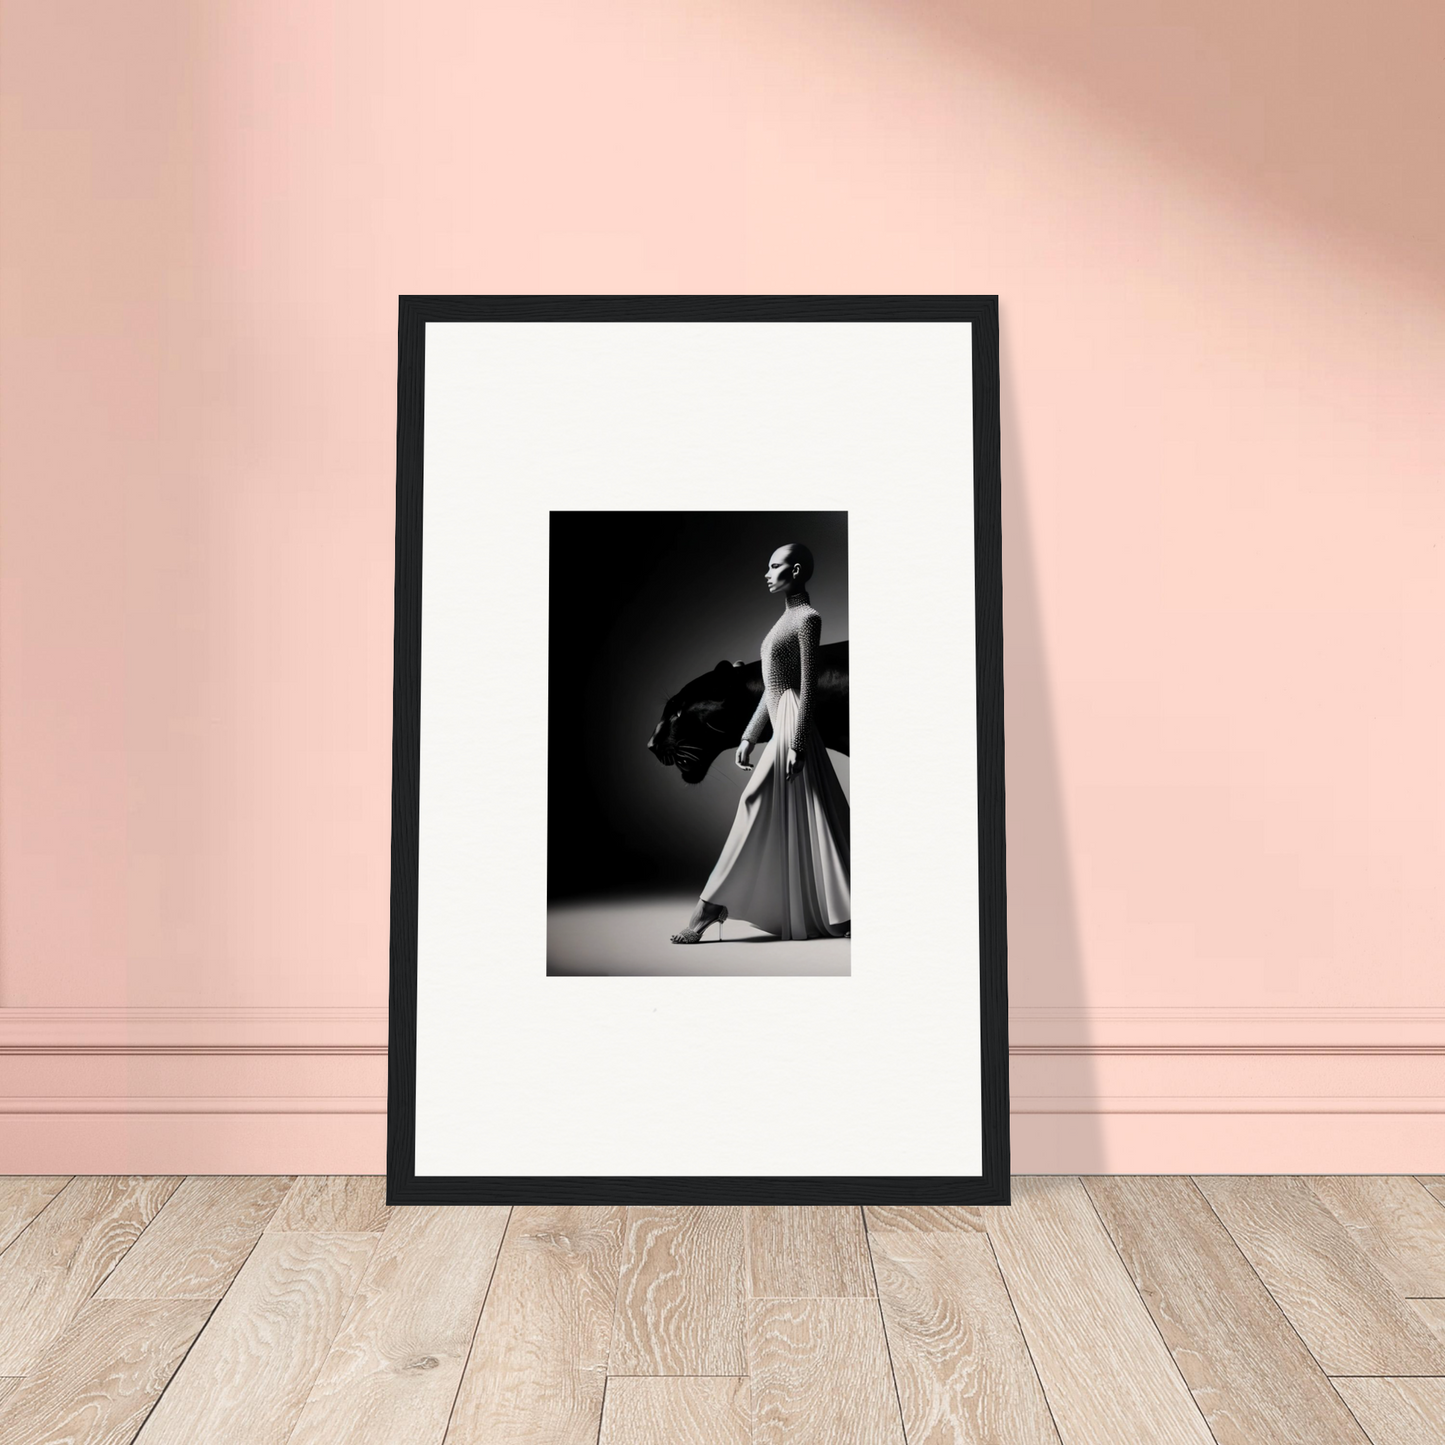 Dancers and time a3 - framed poster - print material